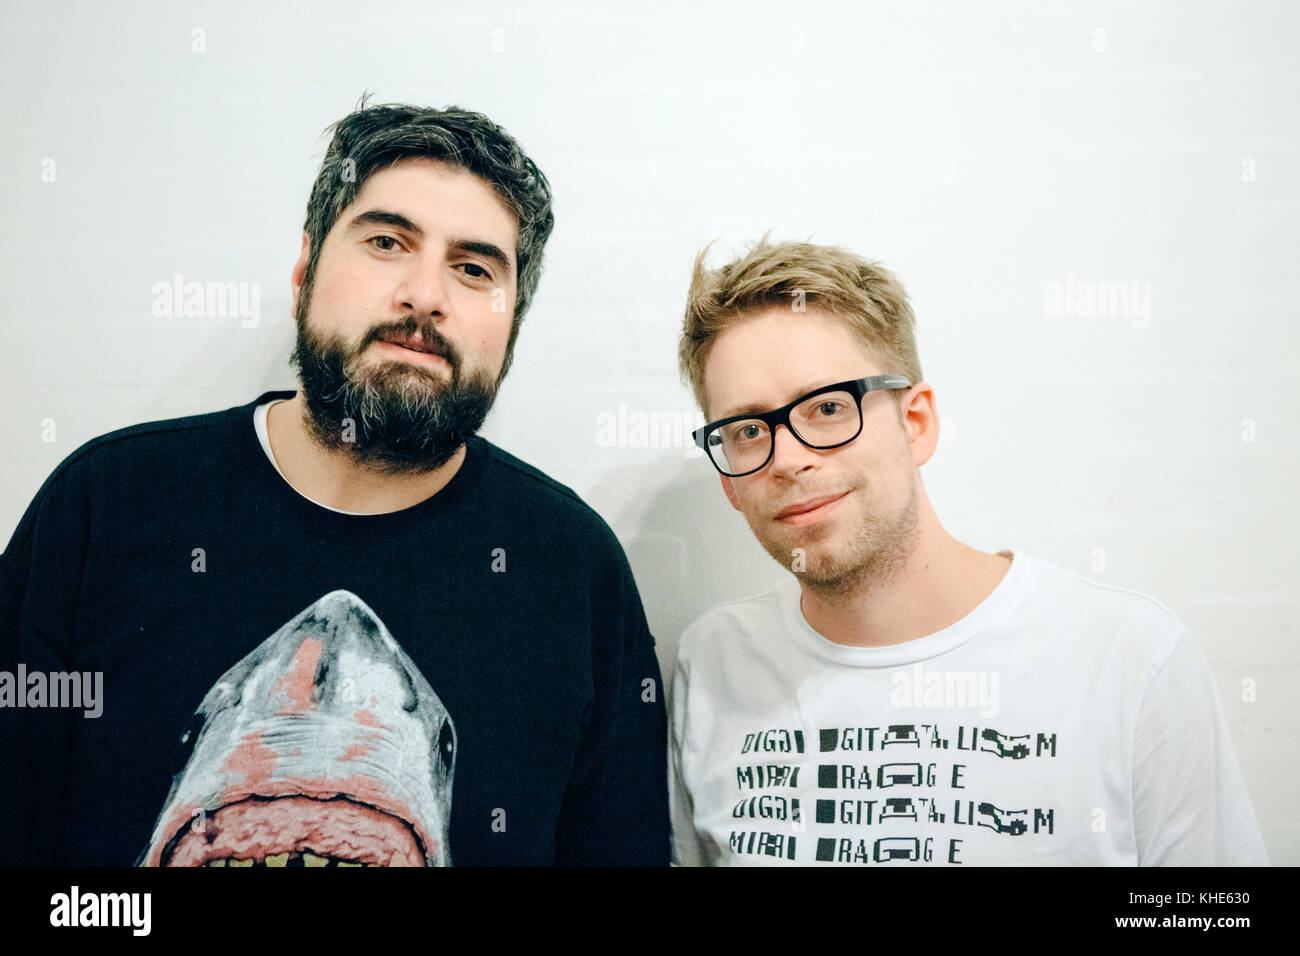 The German electronic music duo Digitalism consists of the two music composers and musicians Jens “Jence” Moelle (R) and Ismail “Isi” Tüfekci (L) who are here portrayed before a live concert in Copenhagen. Denmark, 13/11 2016. Stock Photo